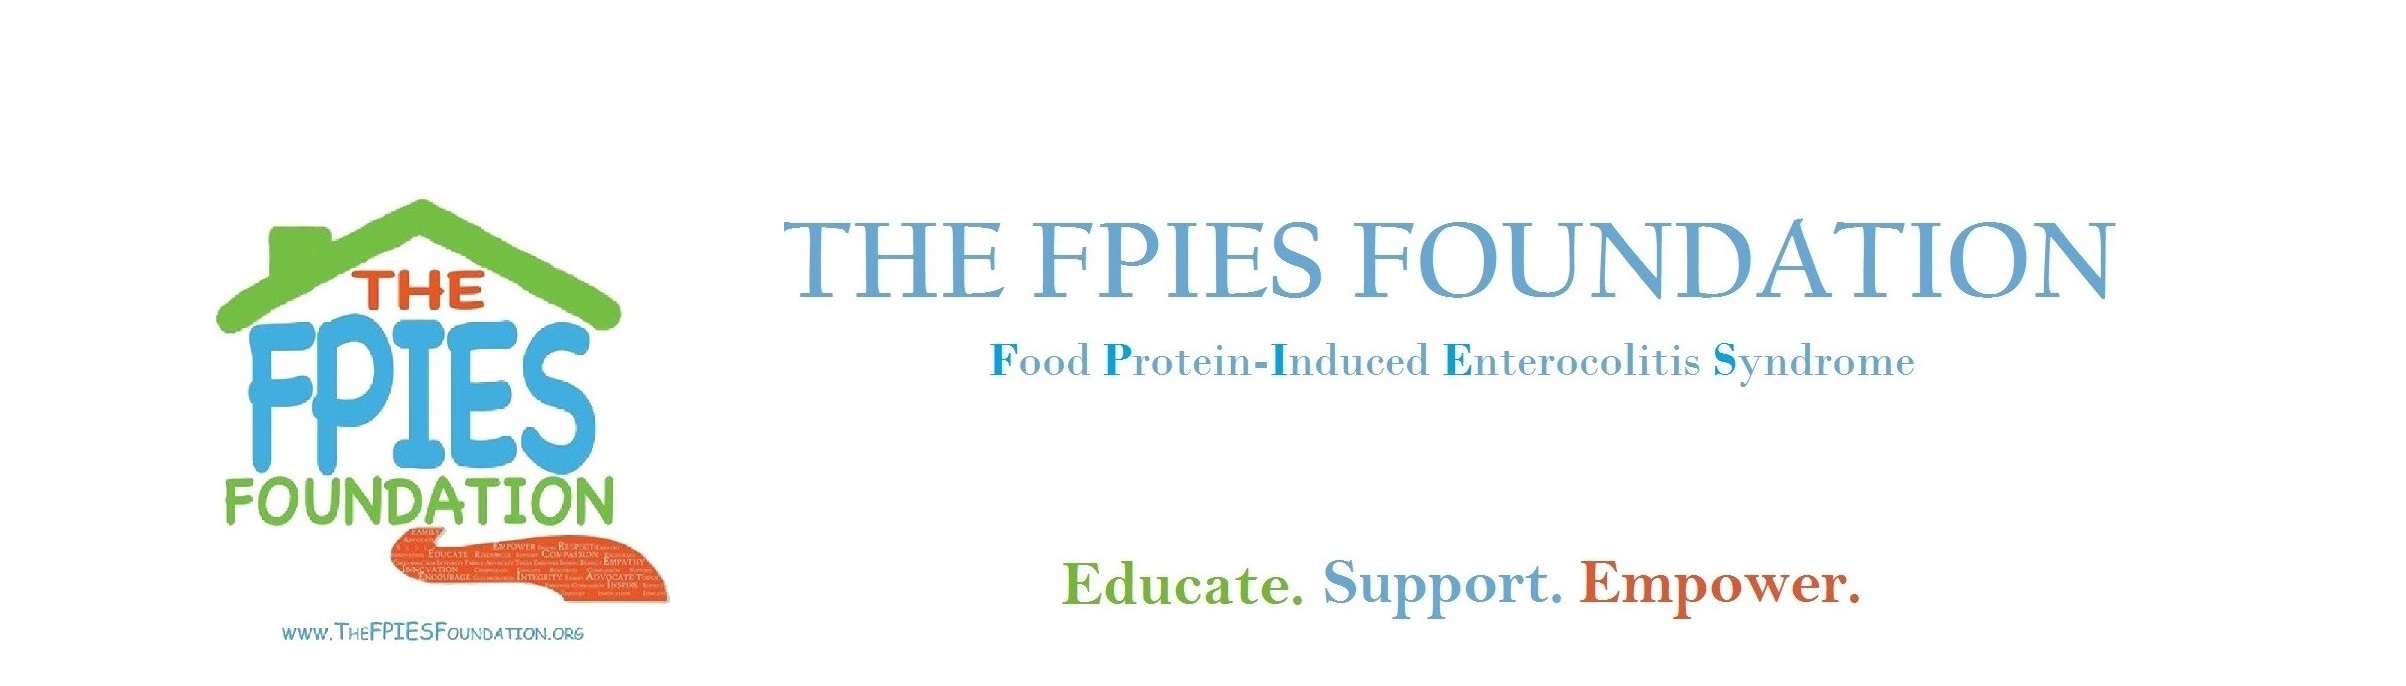 The FPIES Foundation